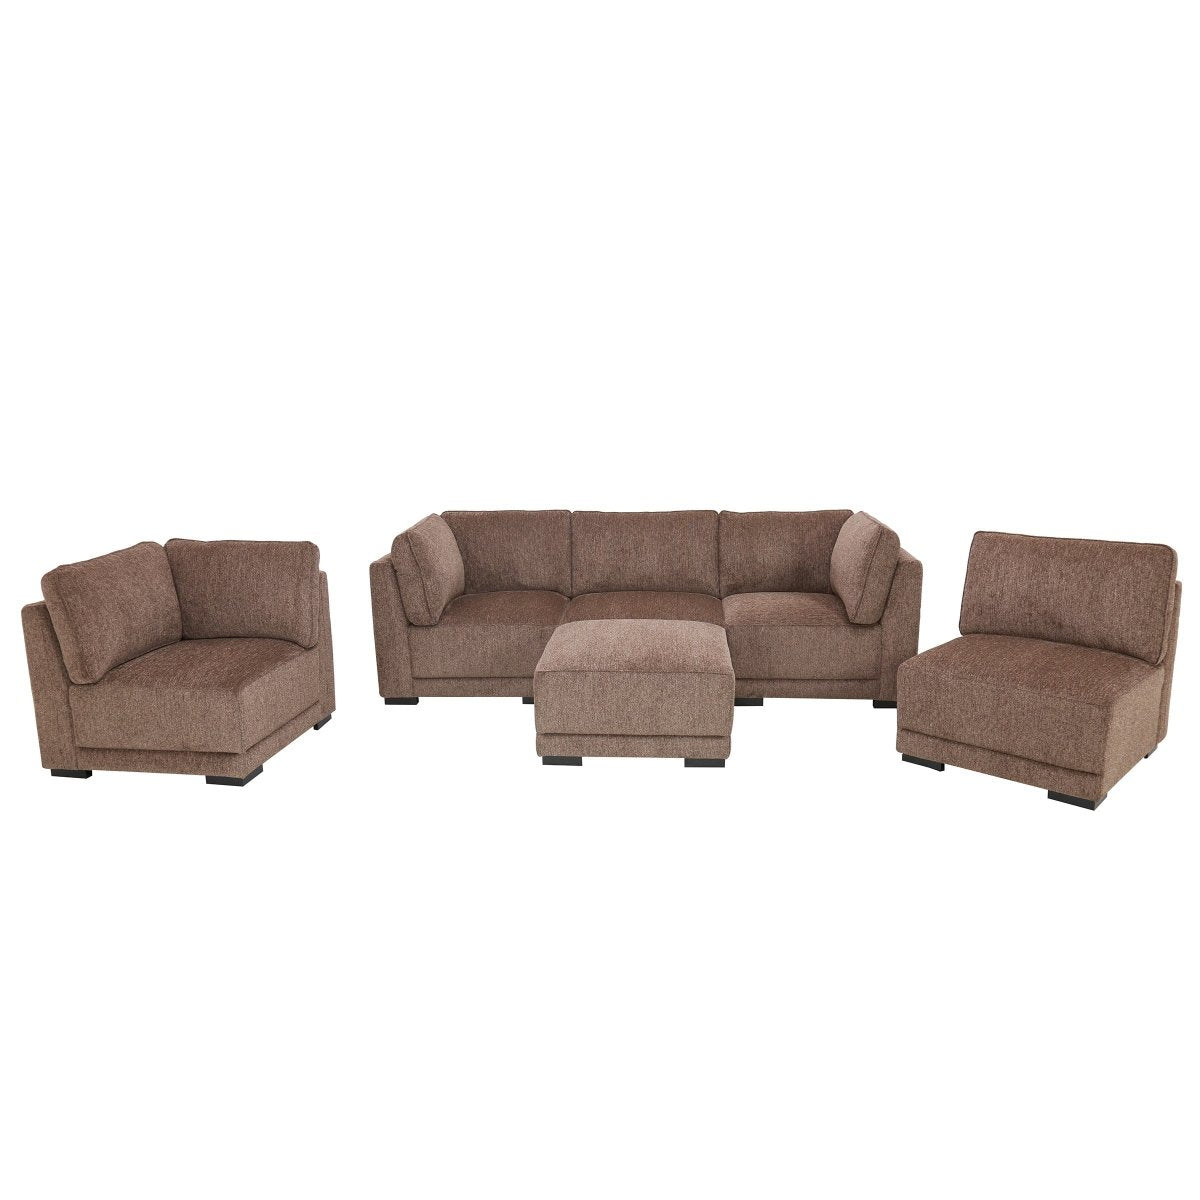 Belize Fabric Modular Sectional - Alpine Outlets